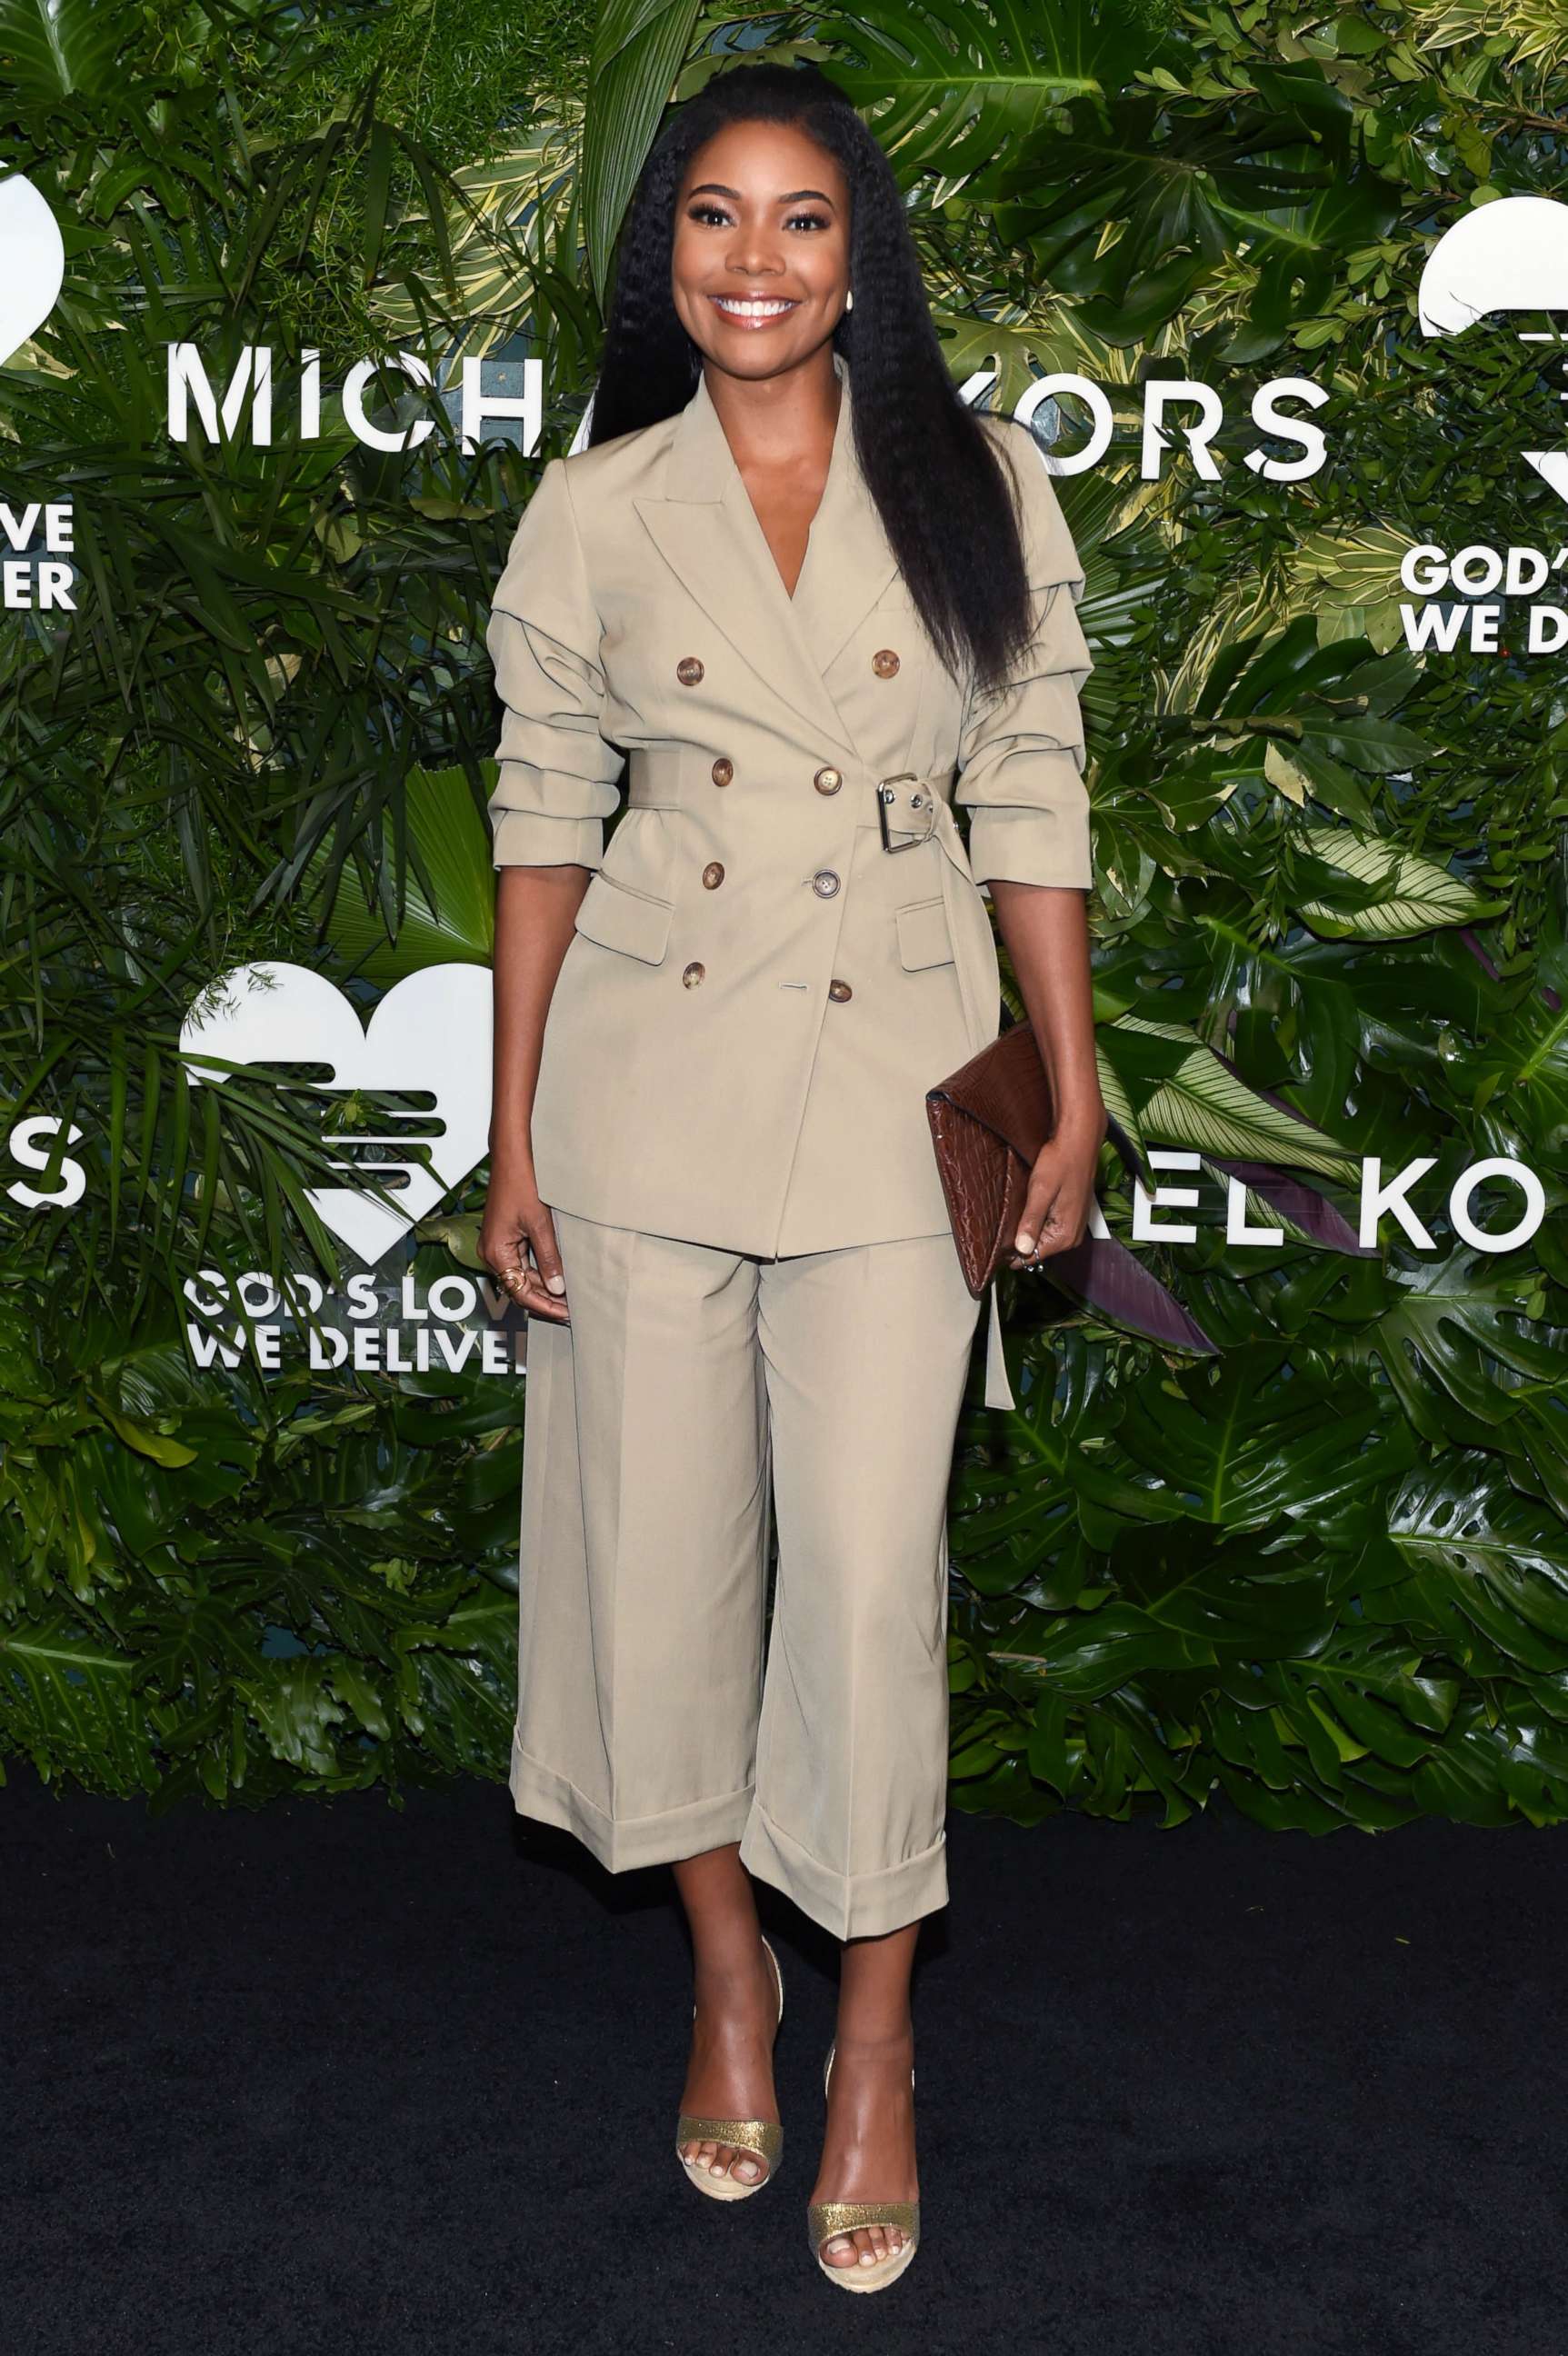 PHOTO: Gabrielle Union at the 11th Annual God's Love We Deliver "Golden Heart Awards," in New York City, Oct. 16, 2017.